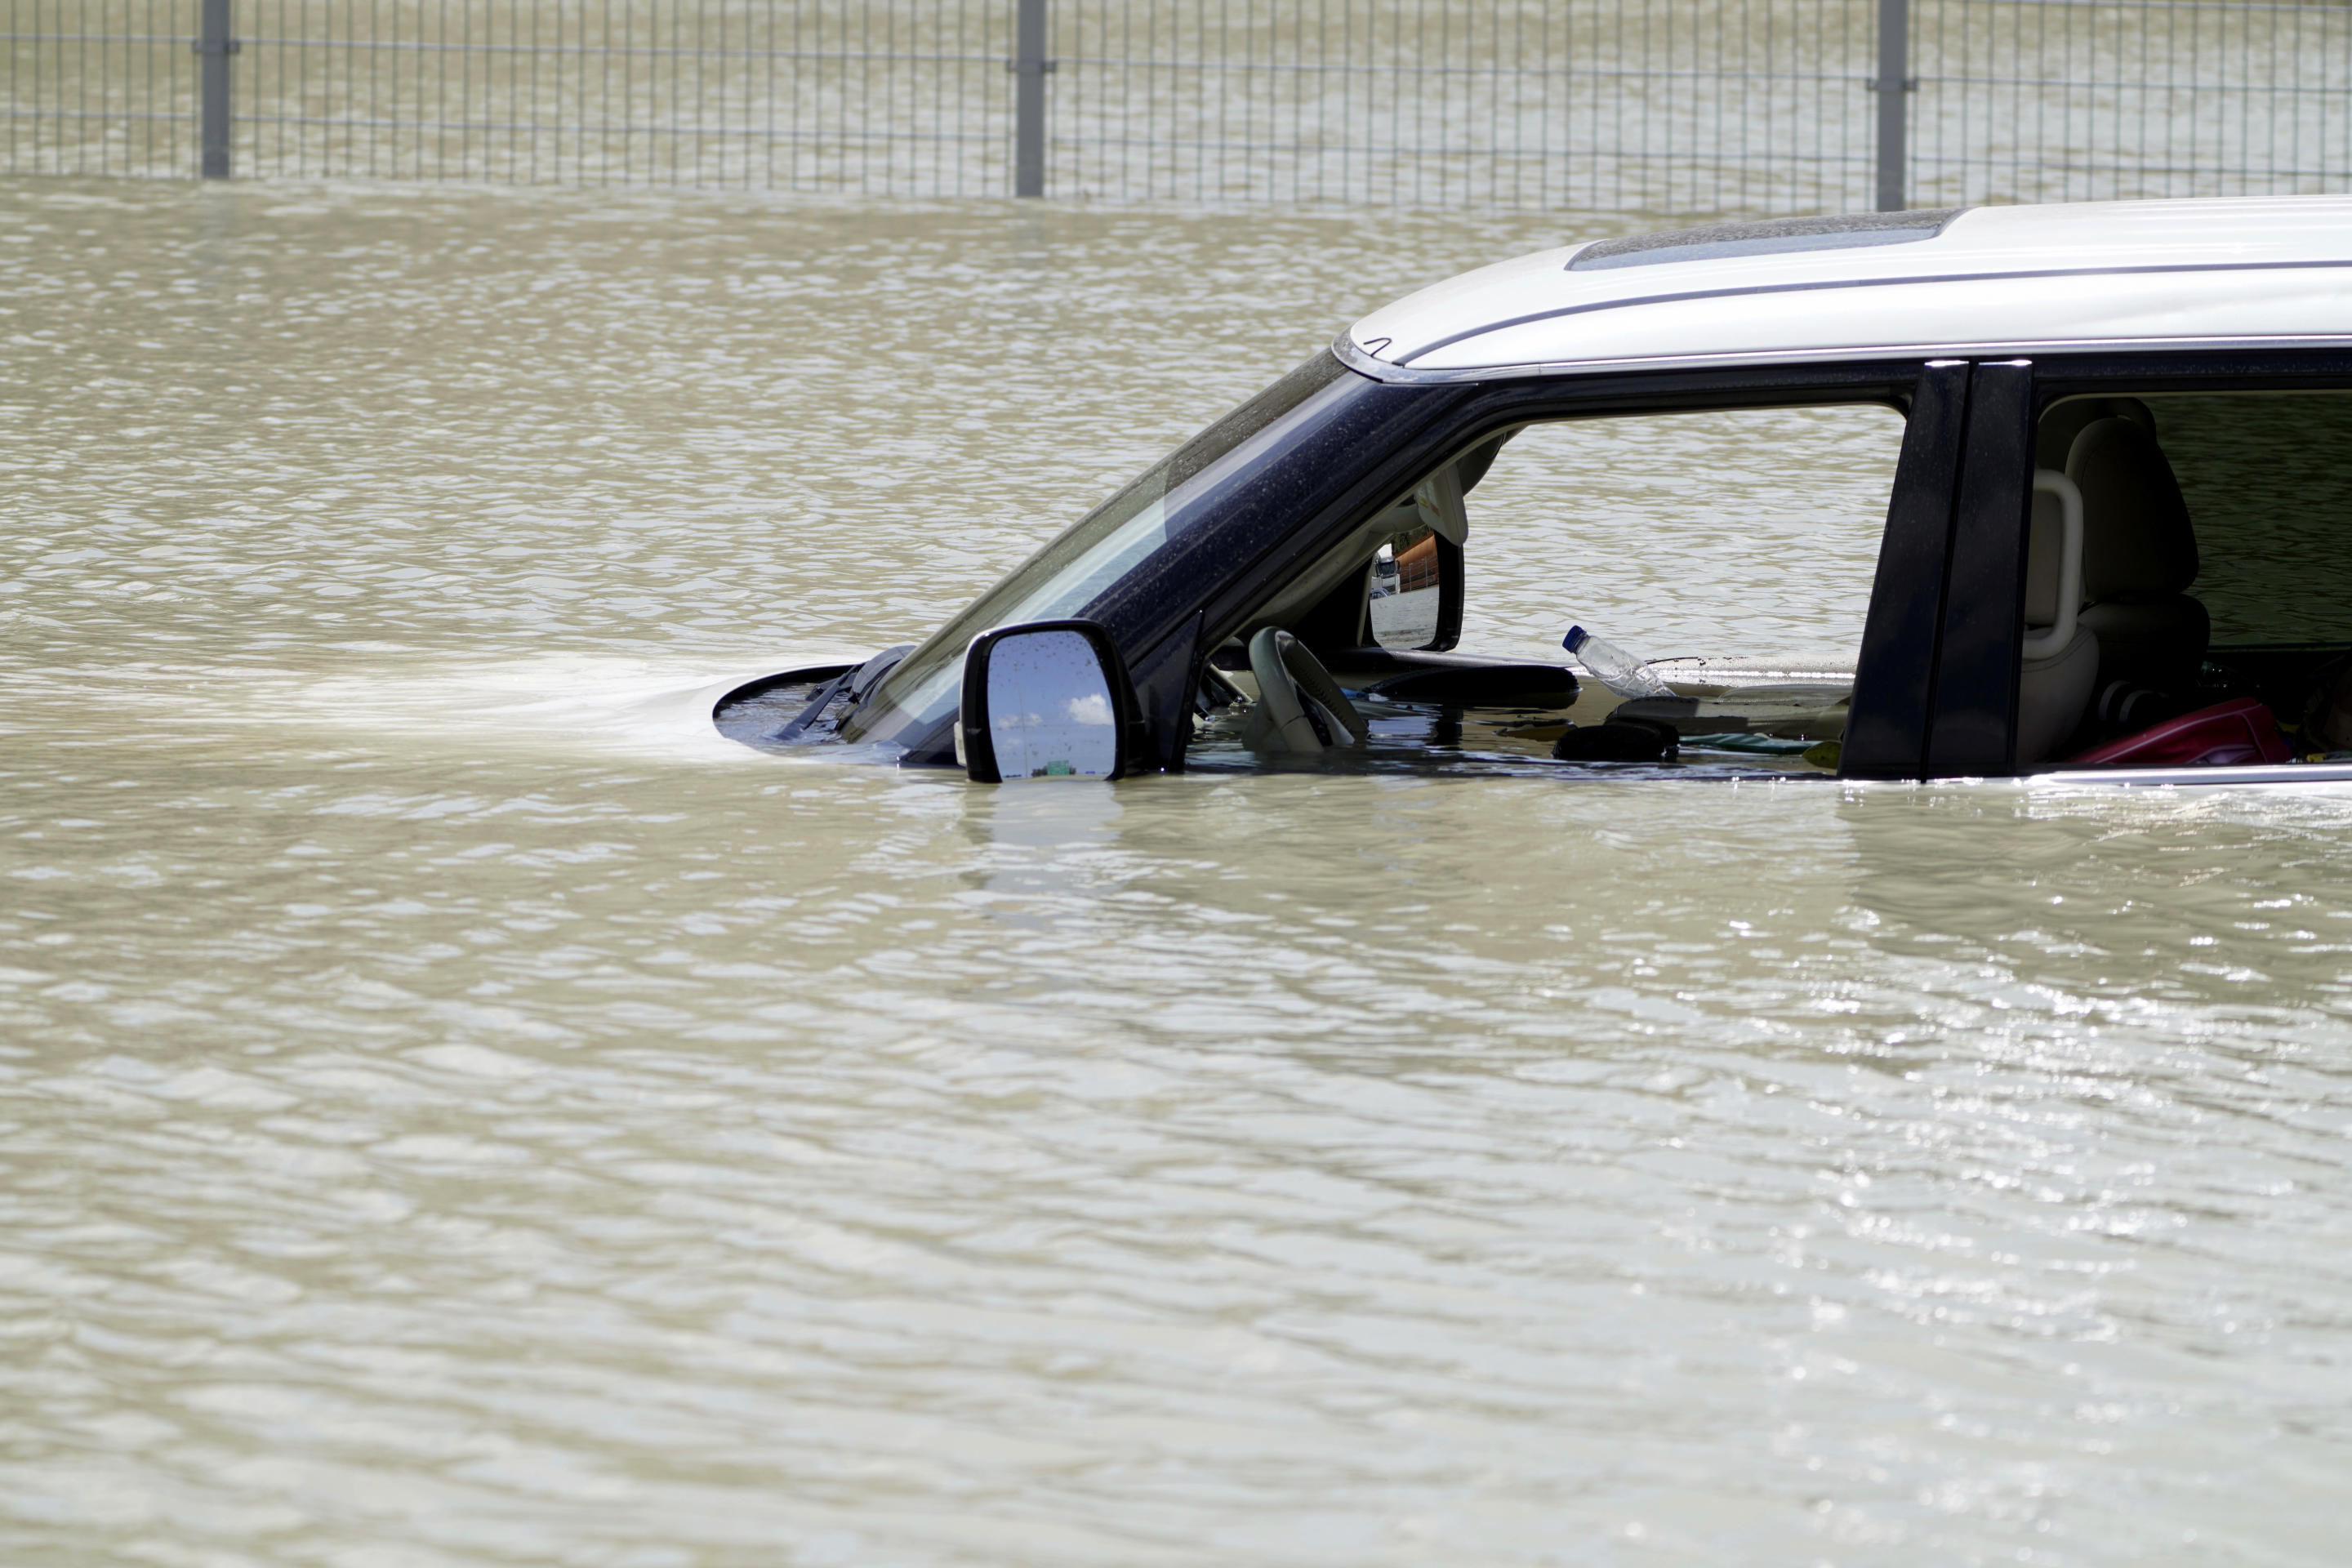 An abandoned SUV is seen submerged in floodwaters in Dubai.